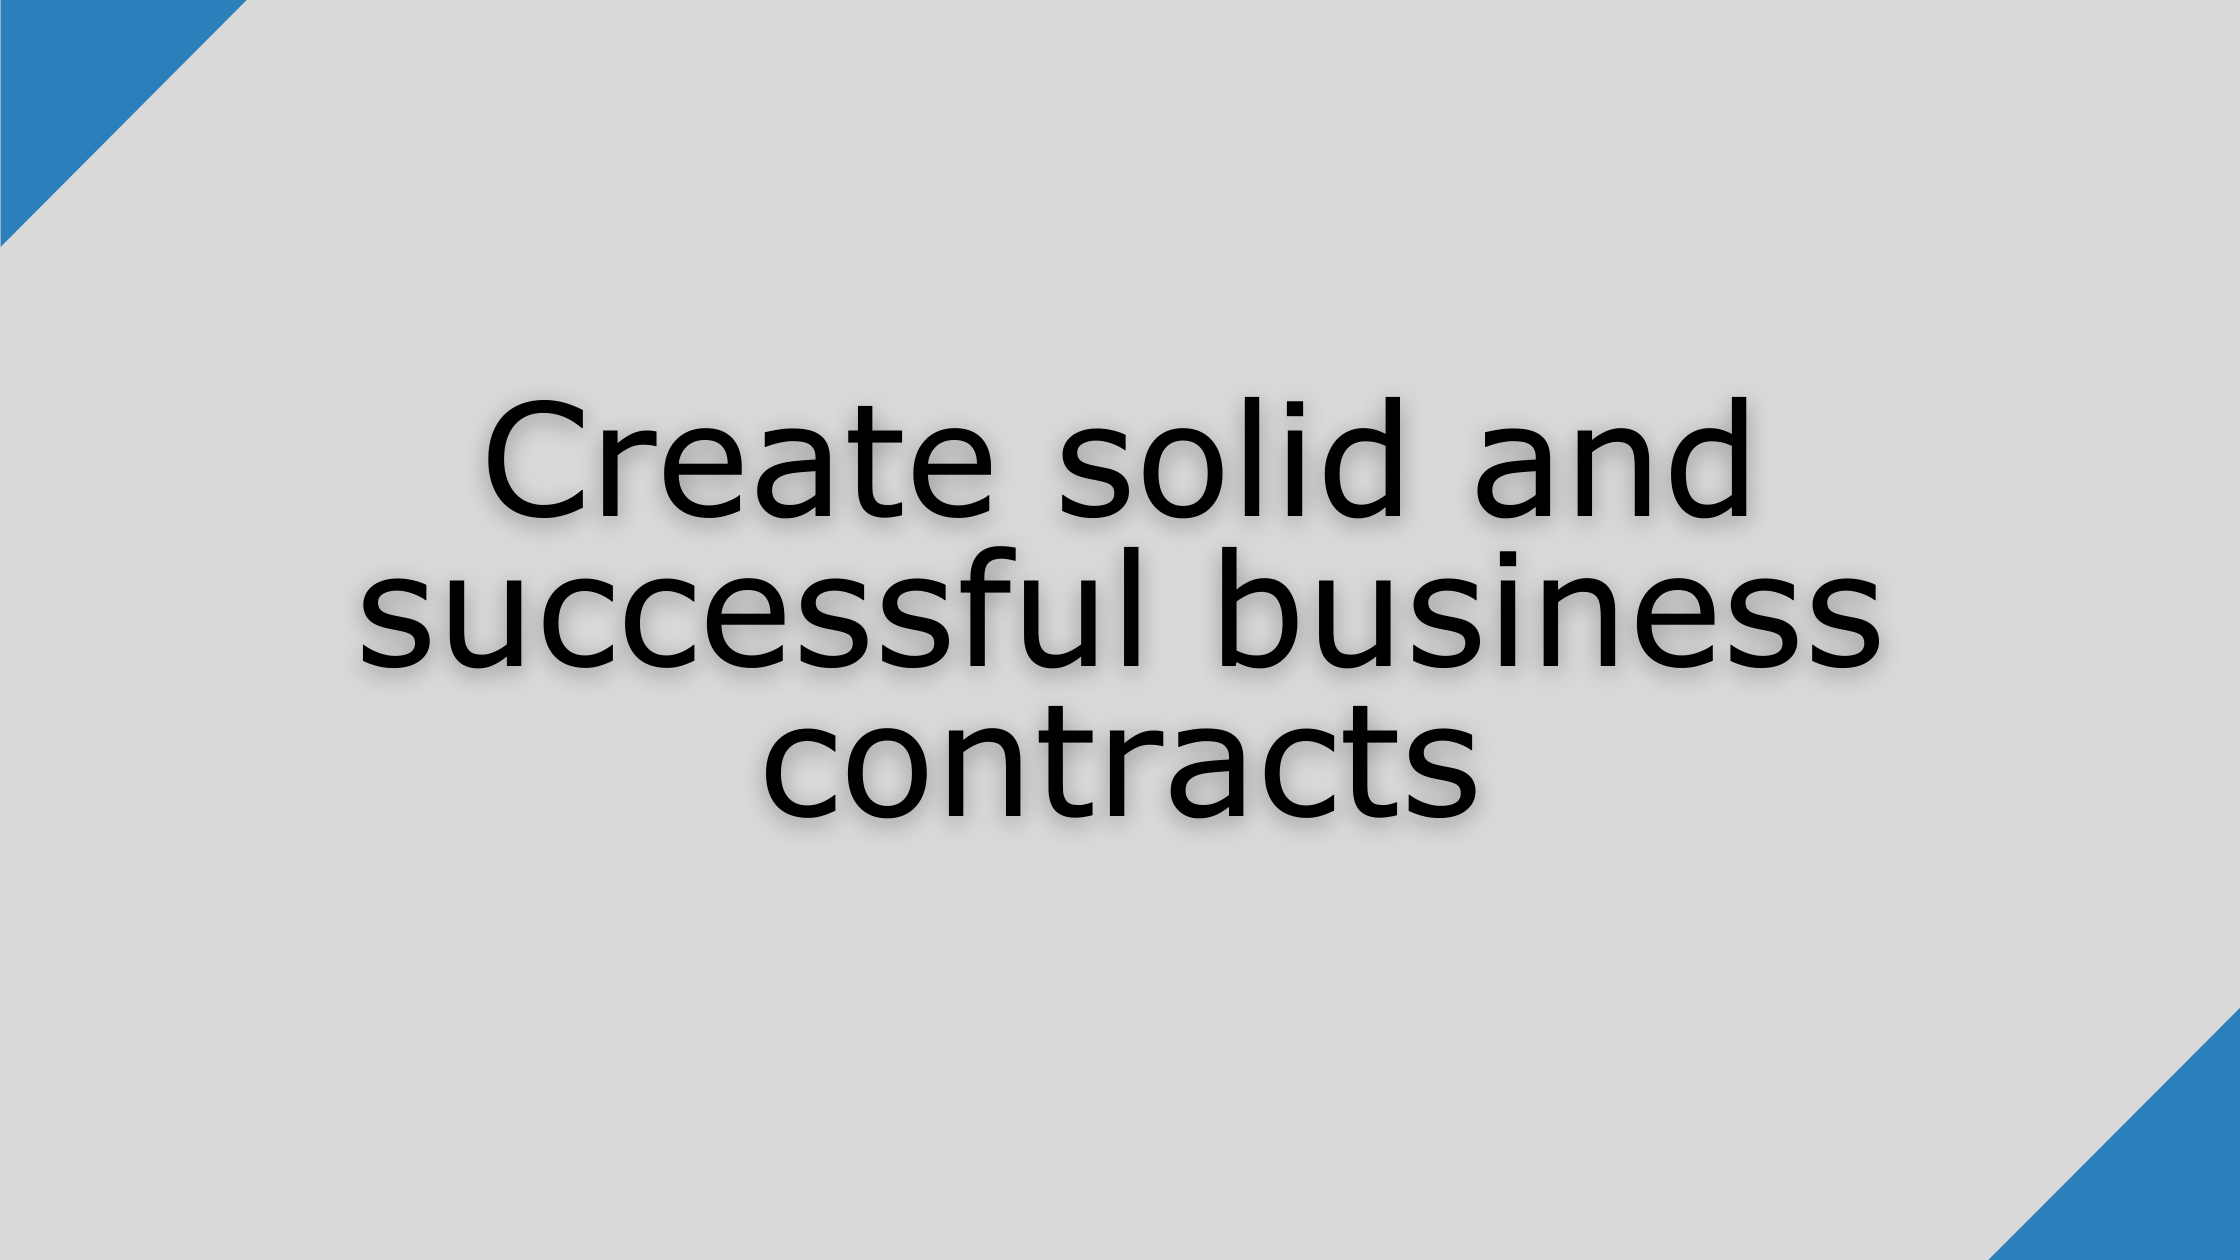 Dock 365 blog - 15 Tips for Writing Successful Business Contracts 